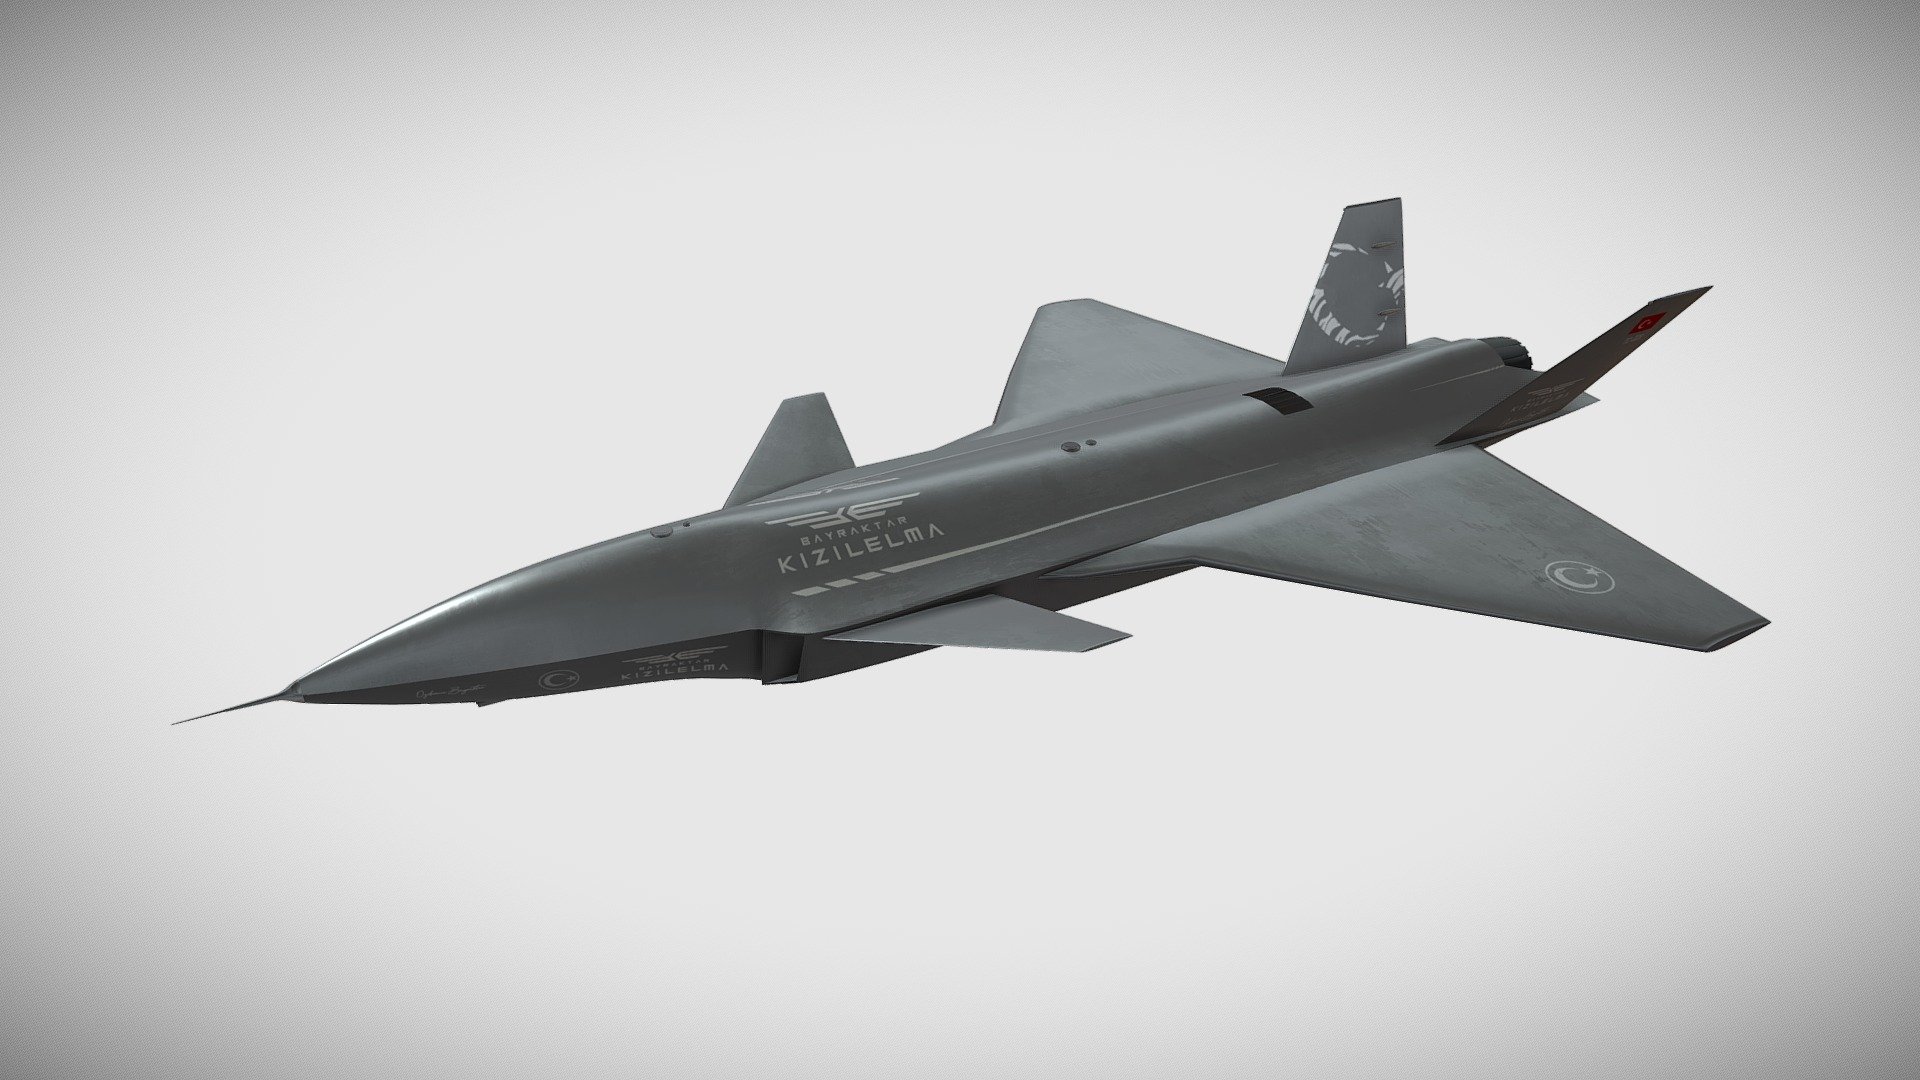 This is a high-quality Bayraktar Jet Engined Unmanned Combat Air Vehicle 3d model. 

I made this model with reference to the real Bayraktar Kızılelma prototype shared by Baykar.

I used Blender software for modelling and Substance Painter for texturing.

For more: https://cemgurbuz.com/bayraktar-kizilelma - Bayraktar Kızılelma MIUS - 3D model by Cem Gürbüz (@cemgurbuz) 3d model